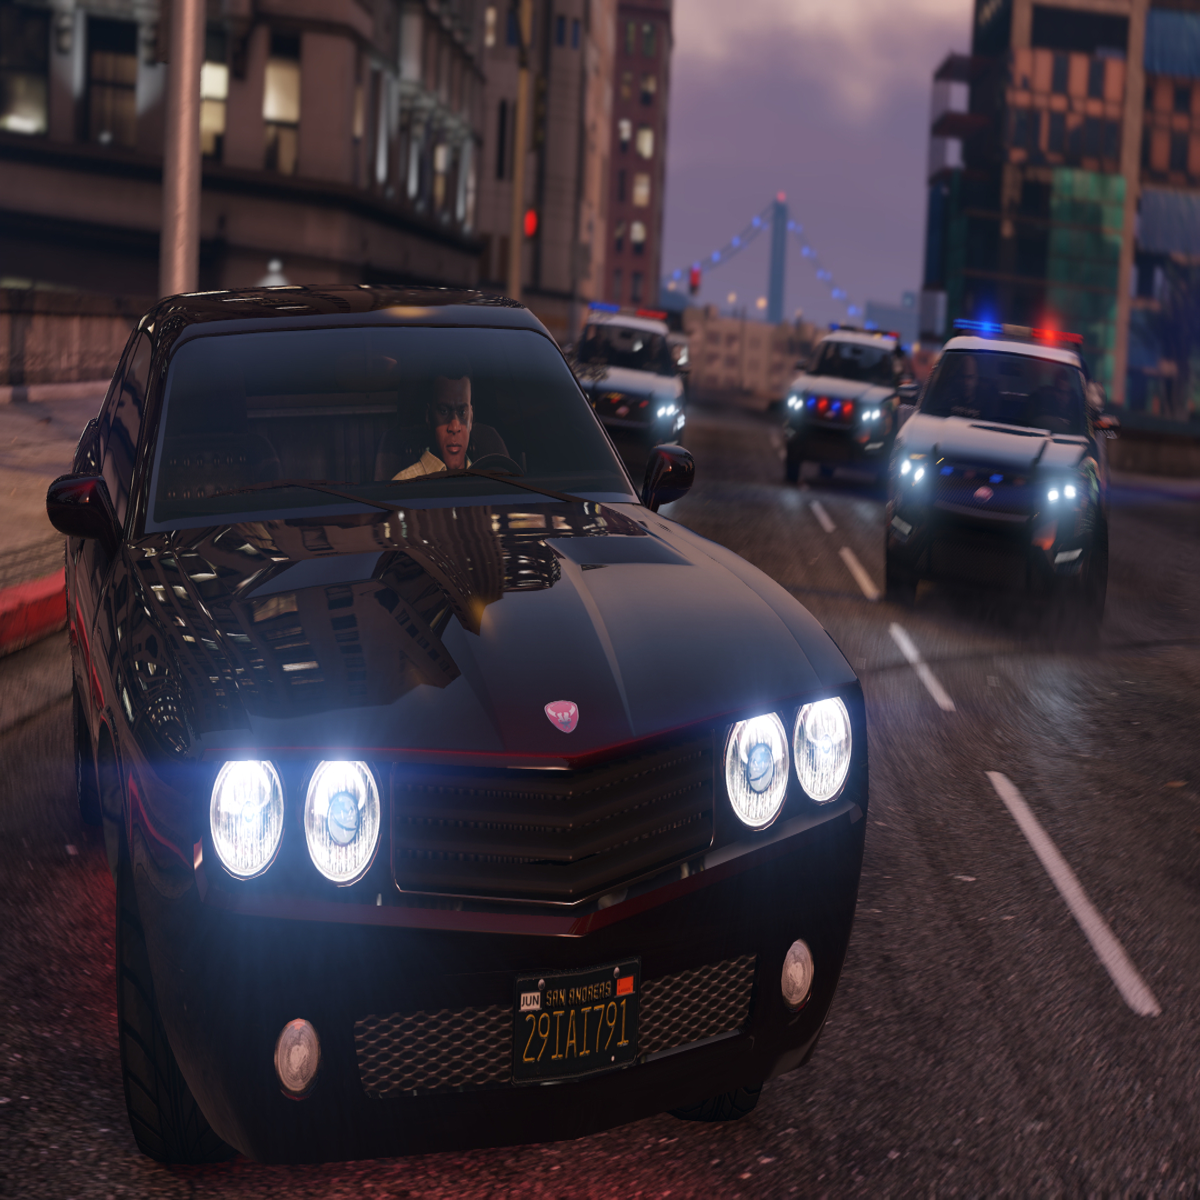 GTA 6: The world's biggest GTA experts on what to expect